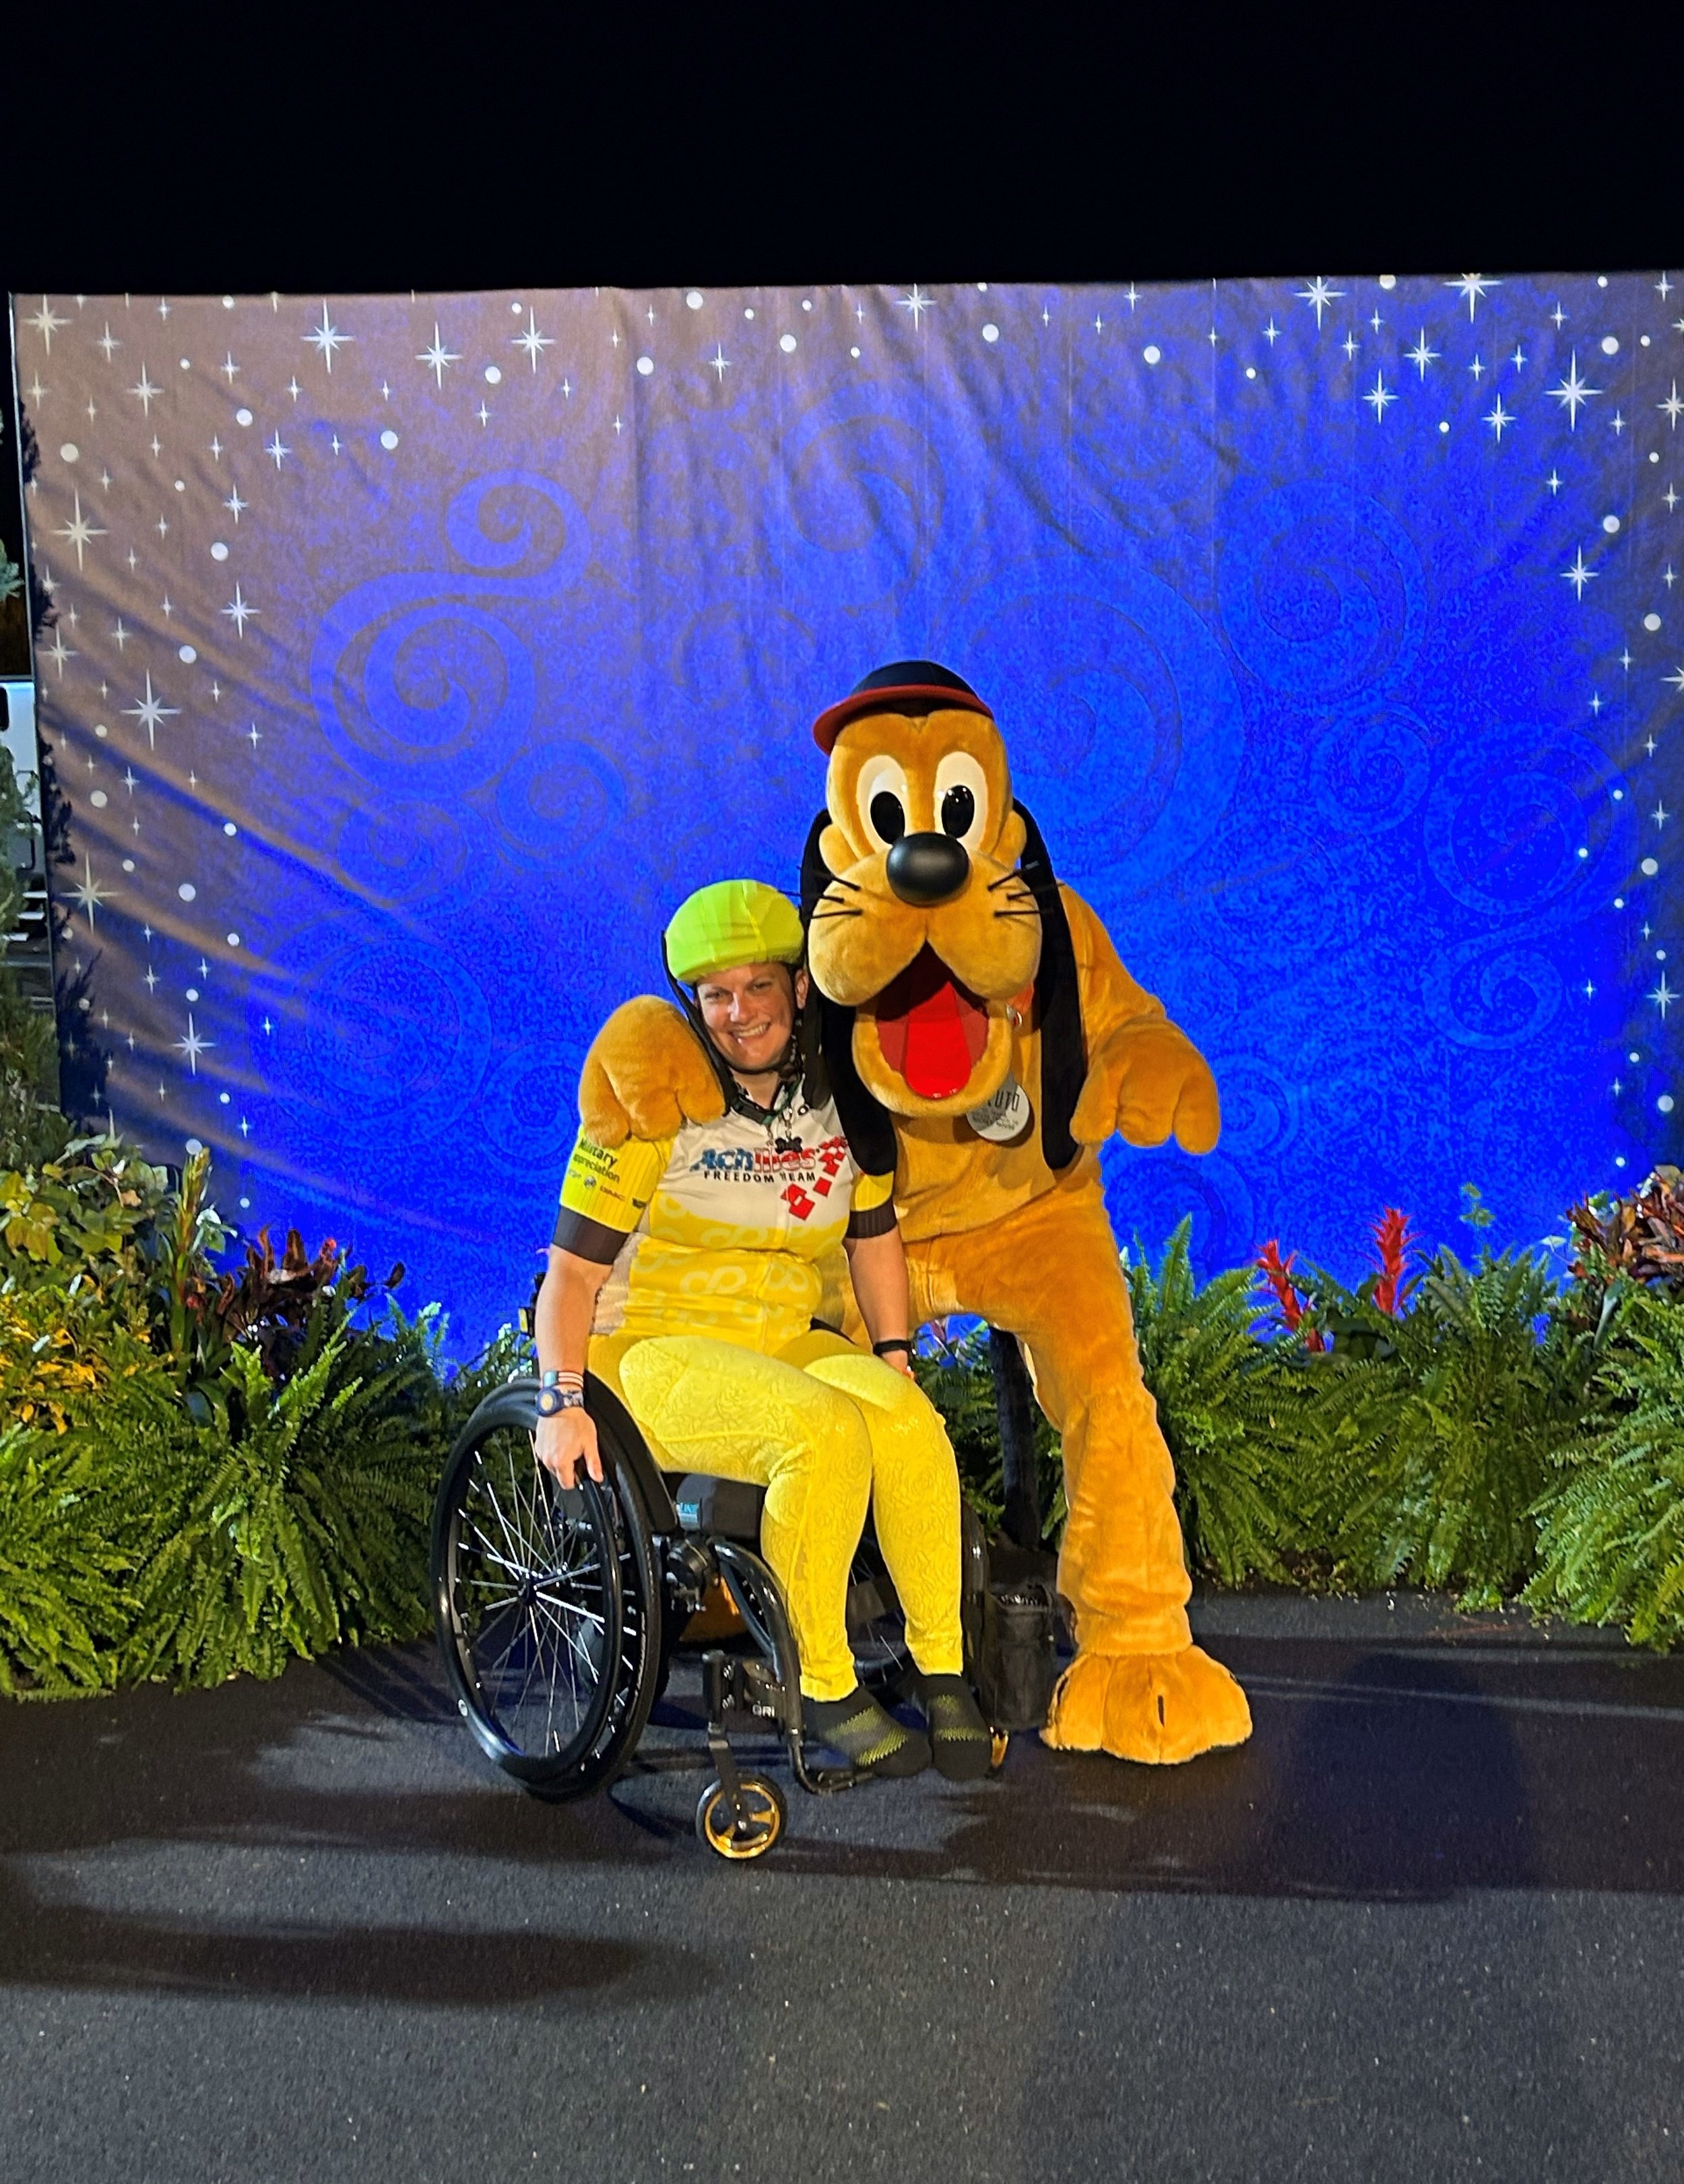  Achilles Freedom Team member posing with Goofy 